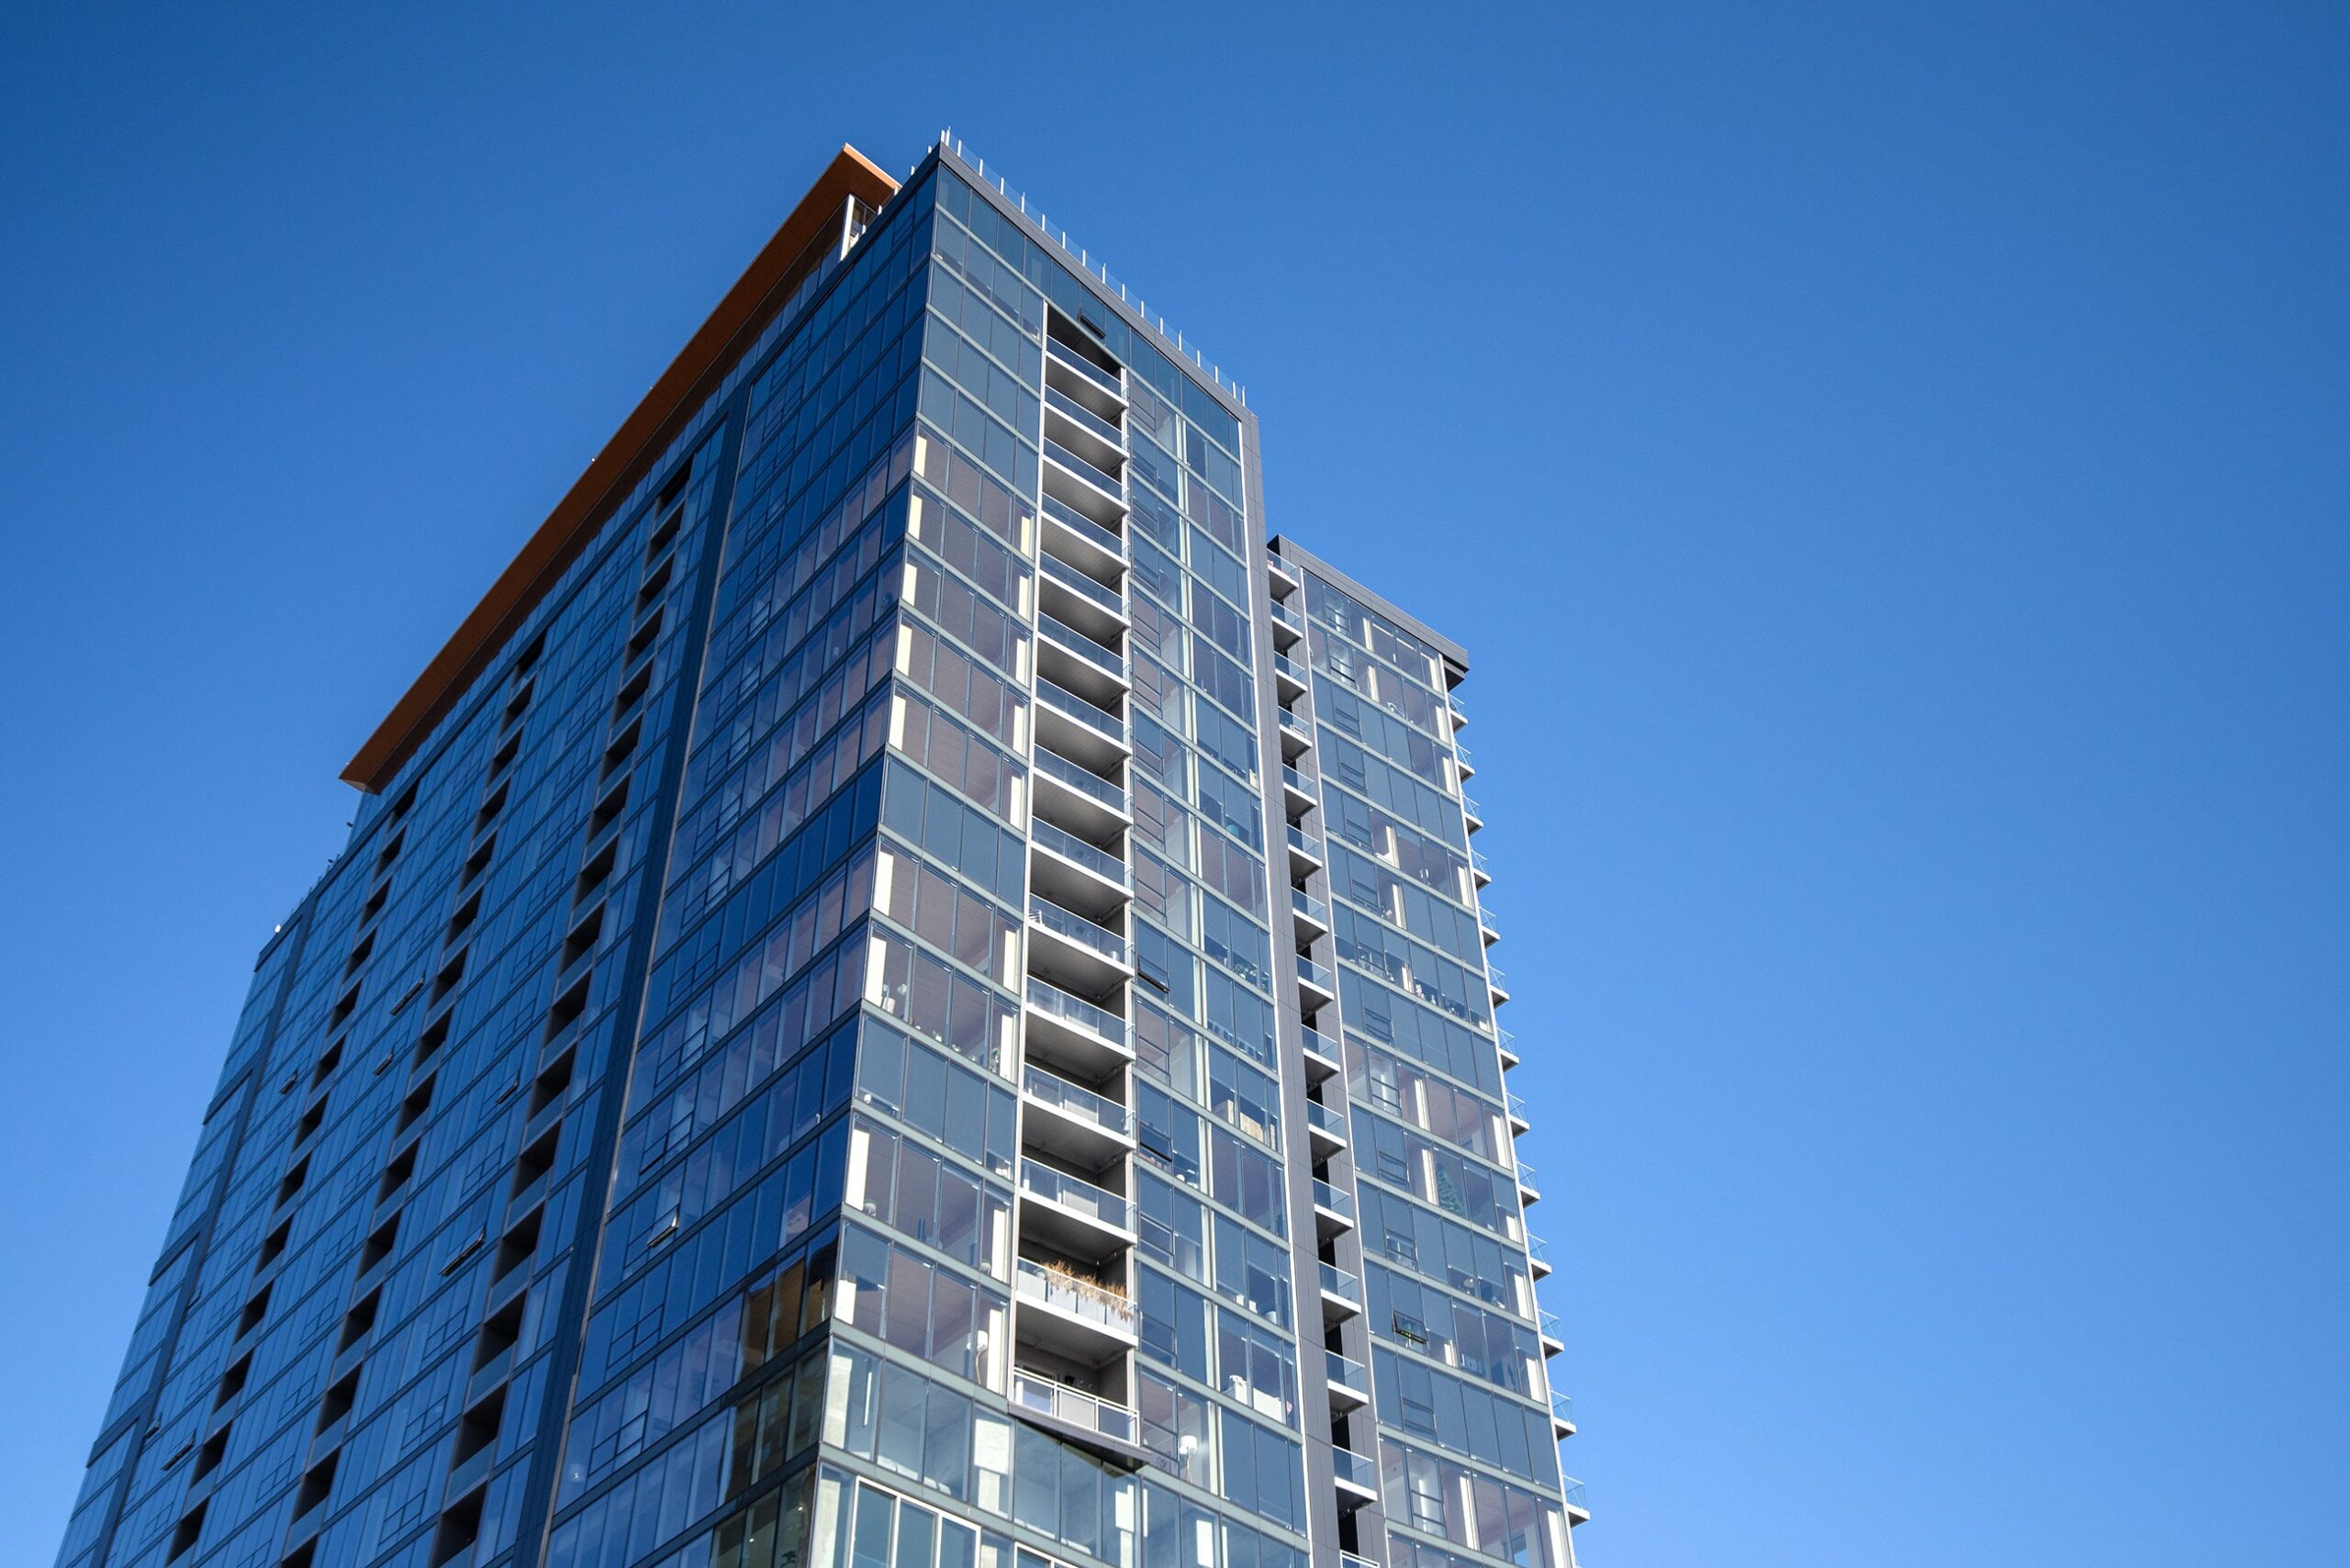 A clear blue sky can be seen from a view below the tall building.